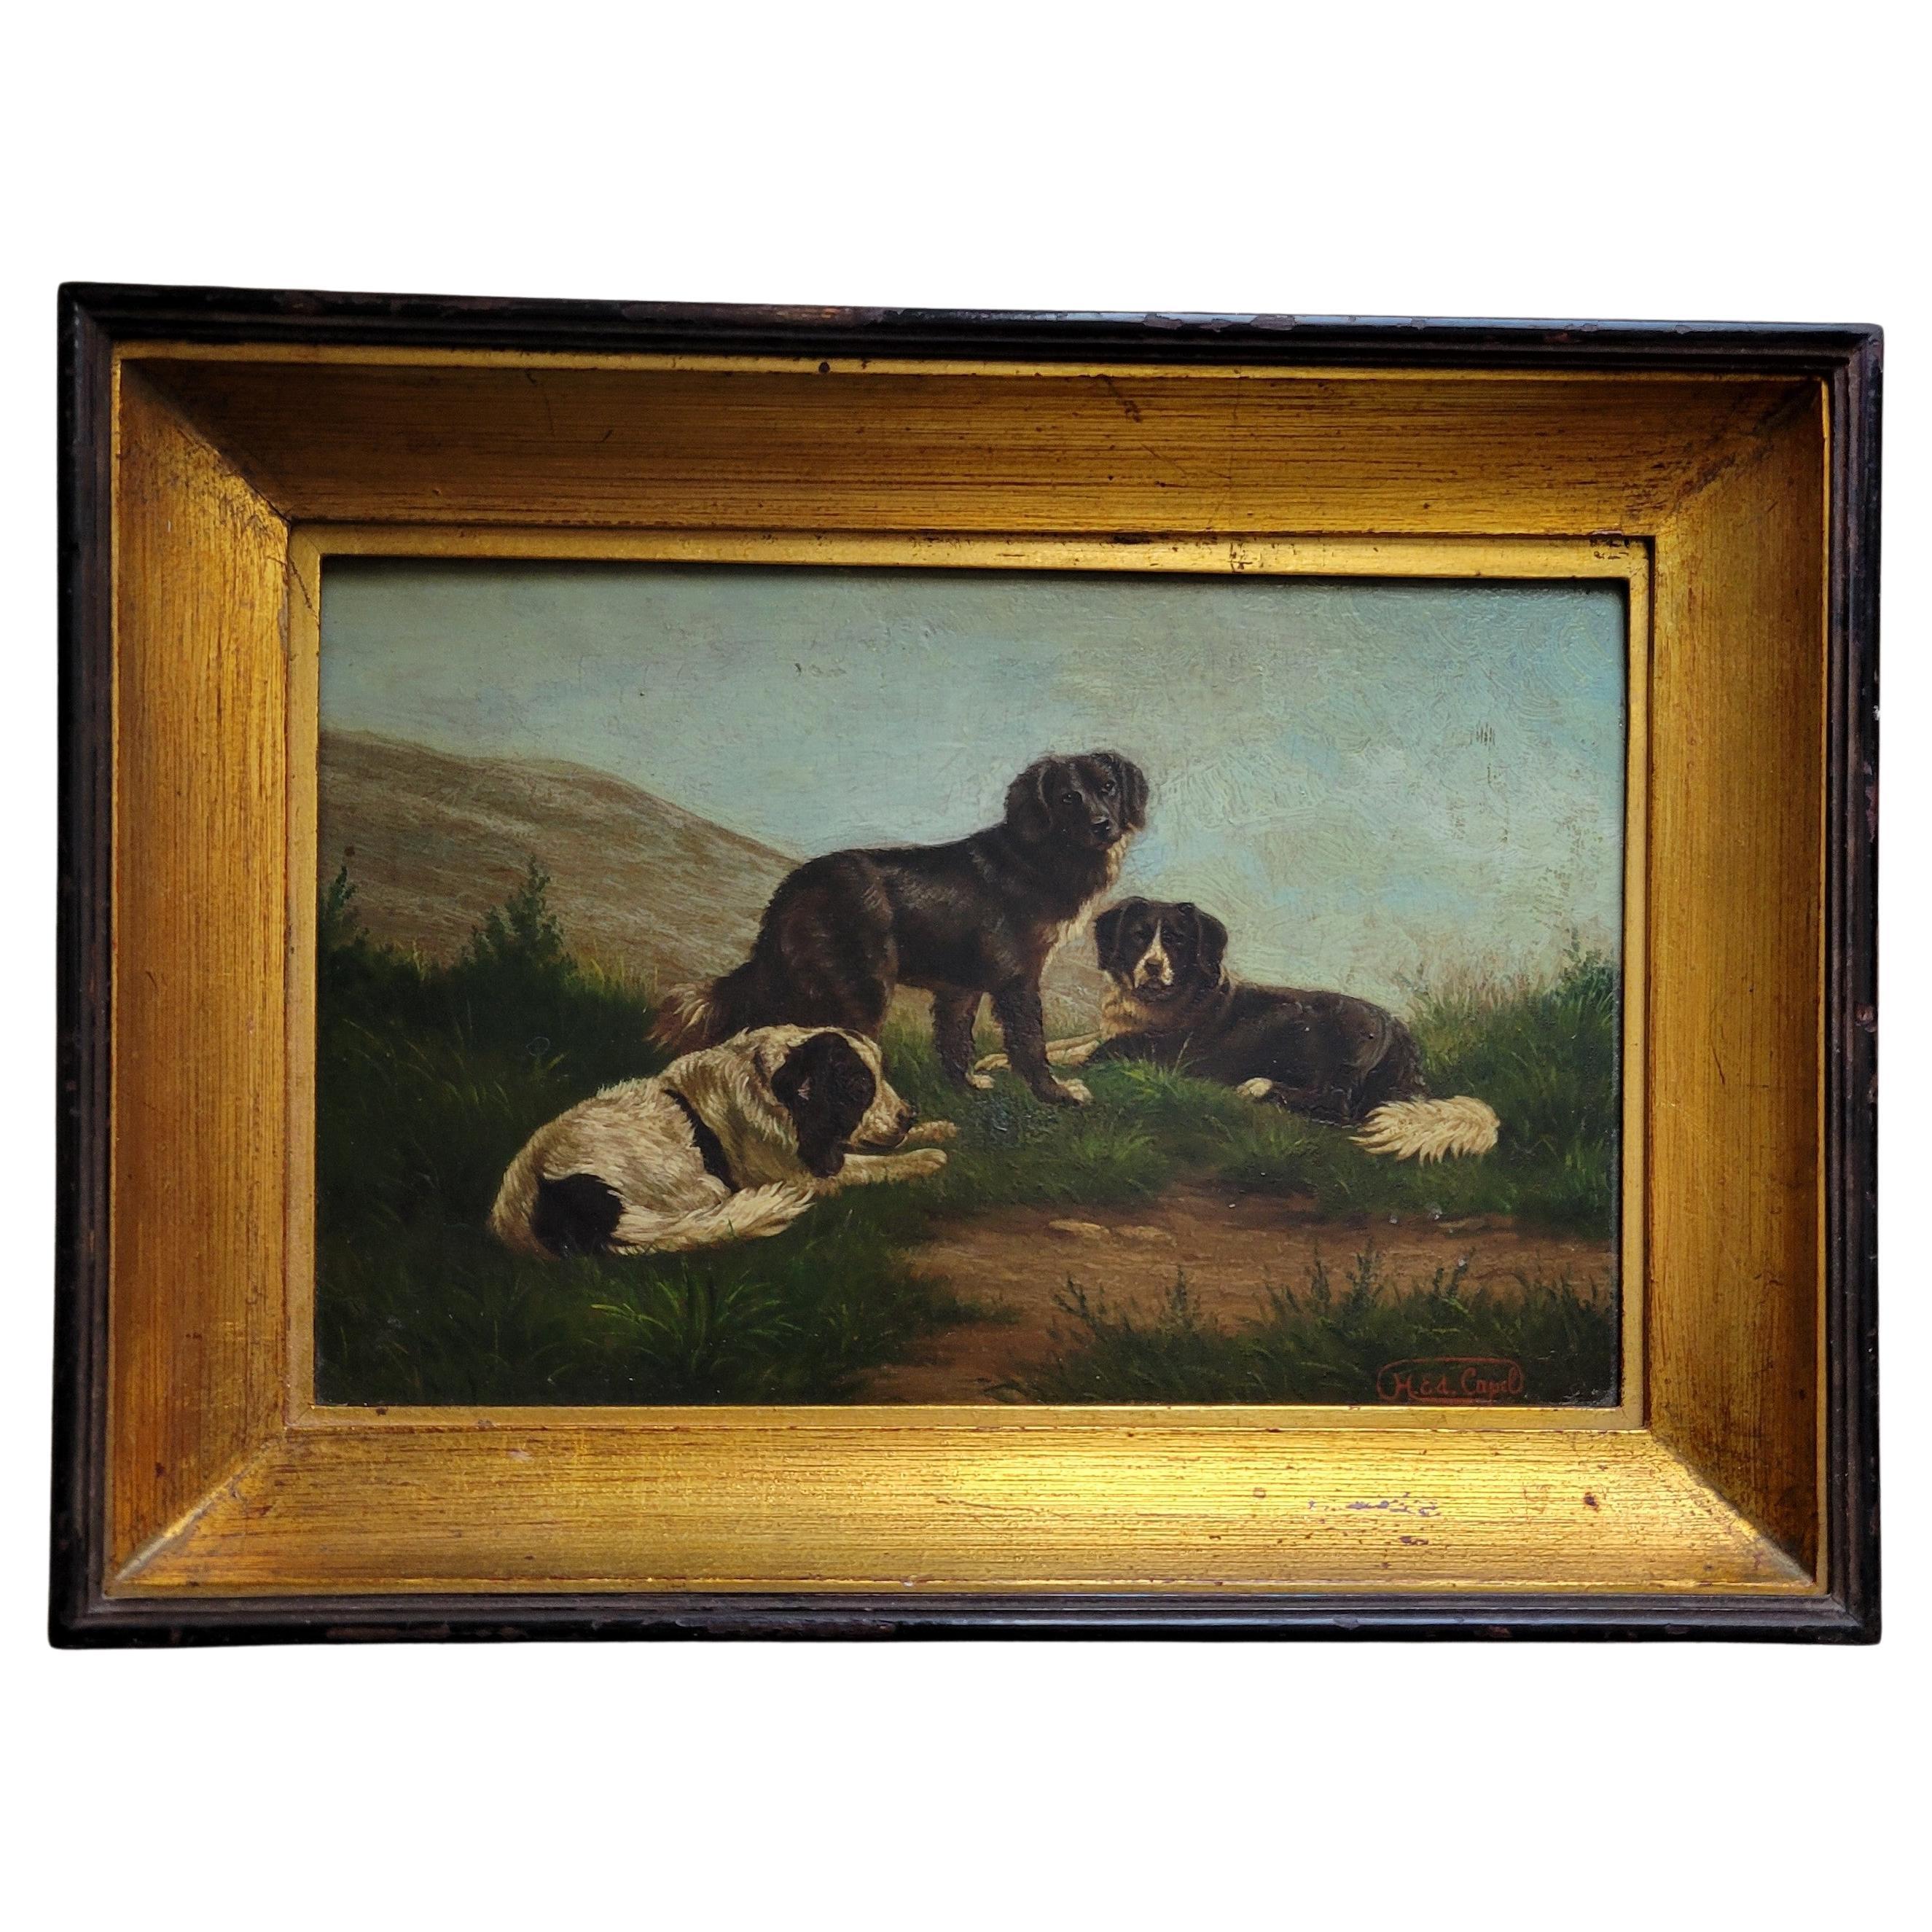 Vintage Border Collie Dog, oil painting on mahogany board, signed H. Ed. Capel